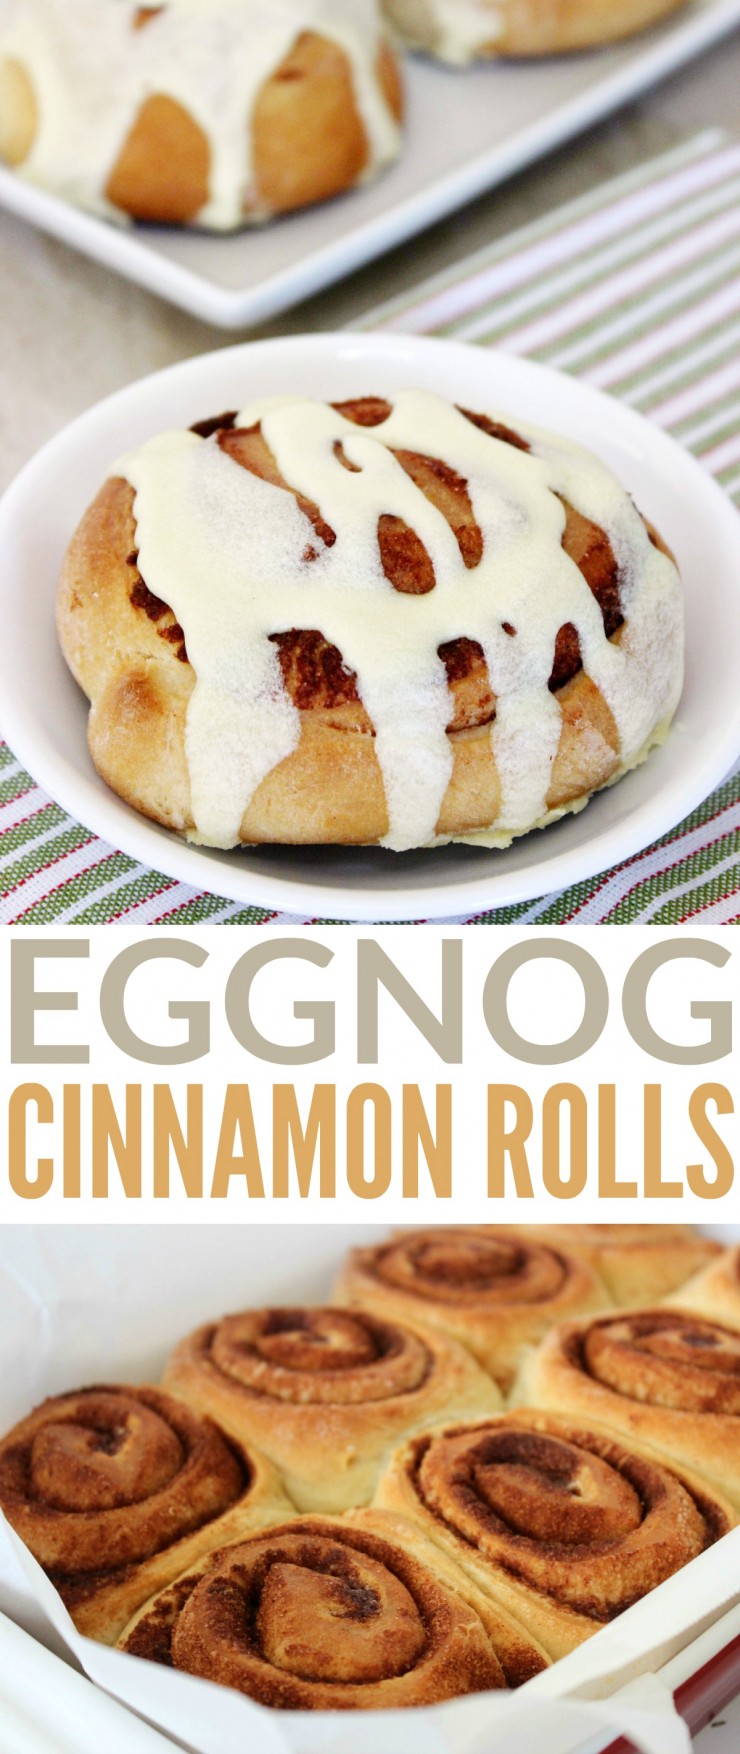 his recipe for Eggnog Cinnamon Rolls is a special treat for those who love eggnog. Enjoy all the flavour of the special holiday beverage in warm and sweet cinnamon roll.